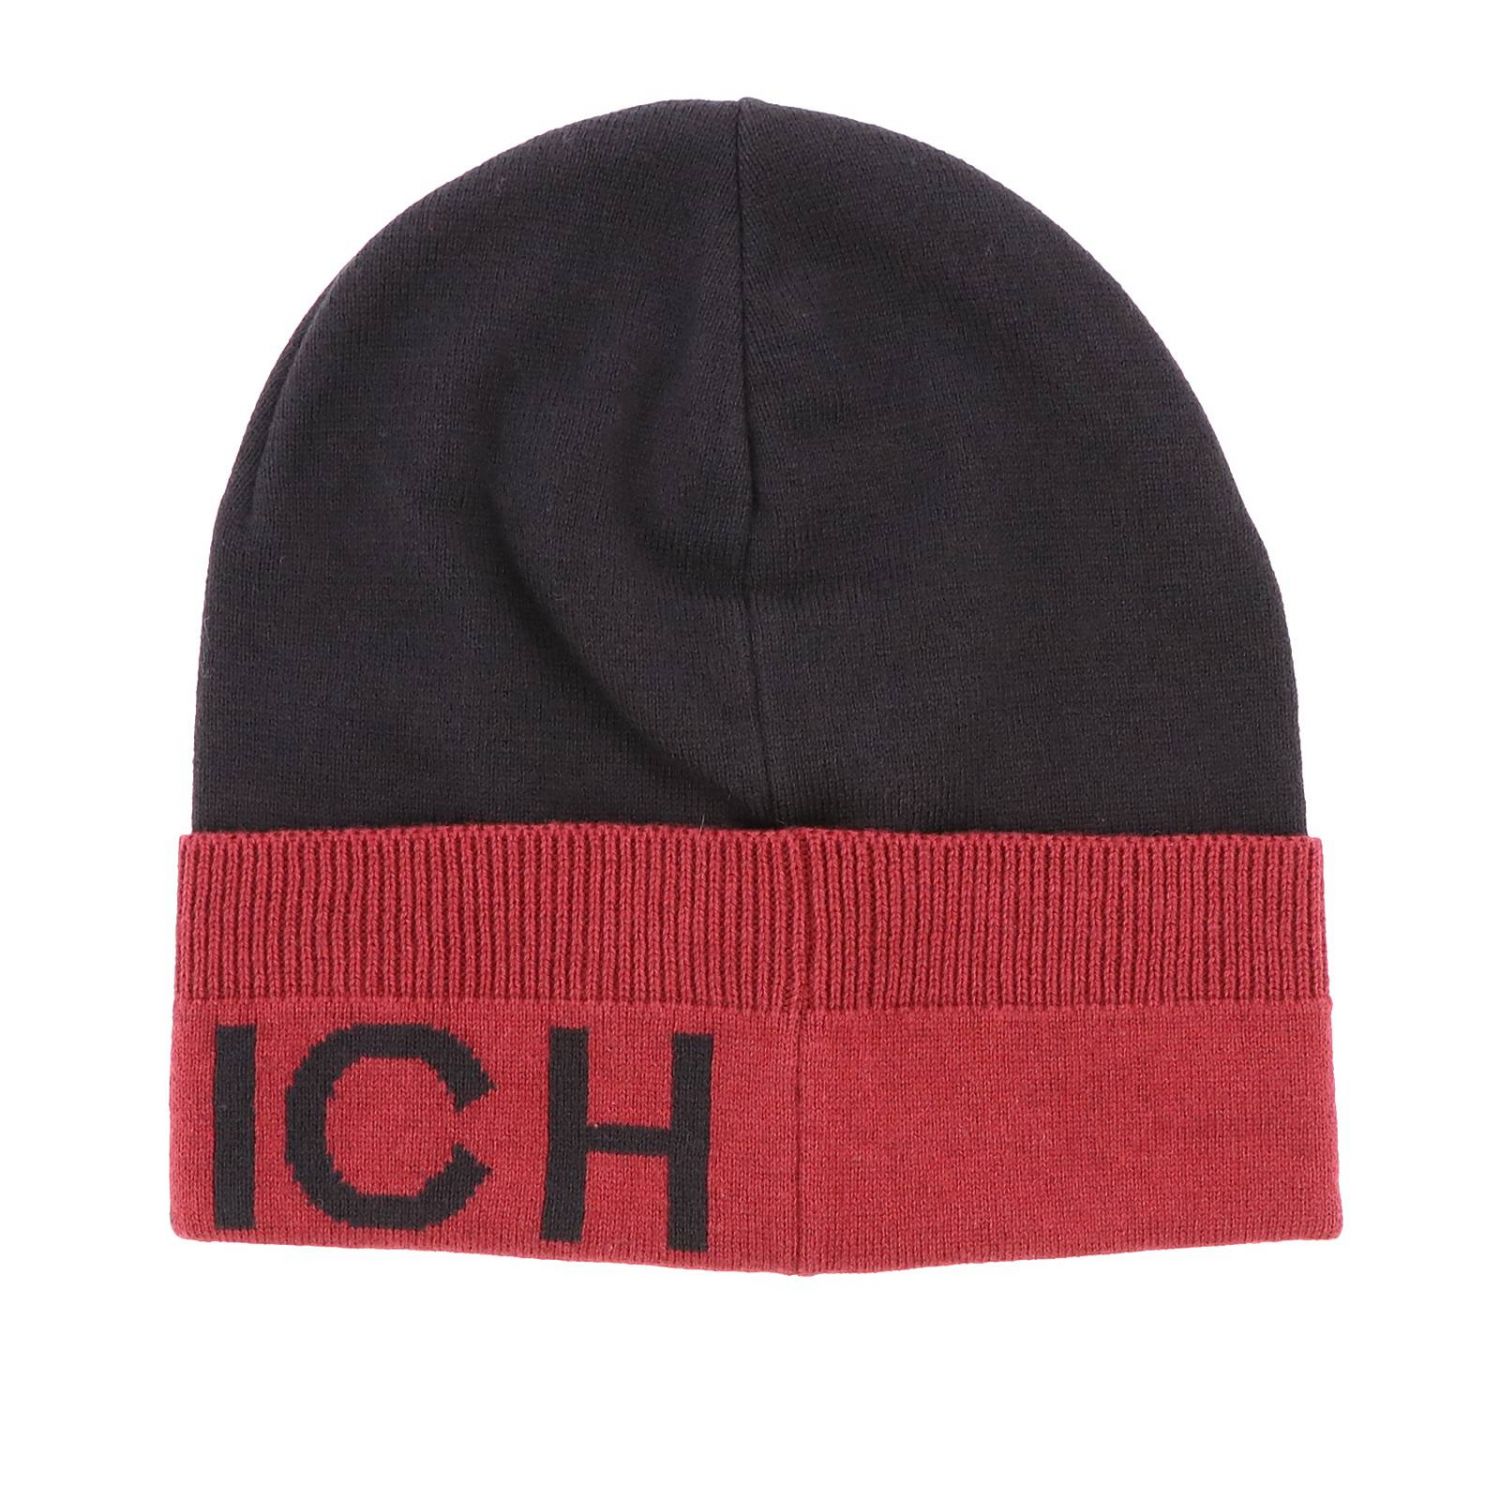 Woolrich Outlet: Hat men - Red | Hat Woolrich WOACC1579 BC01 GIGLIO.COM